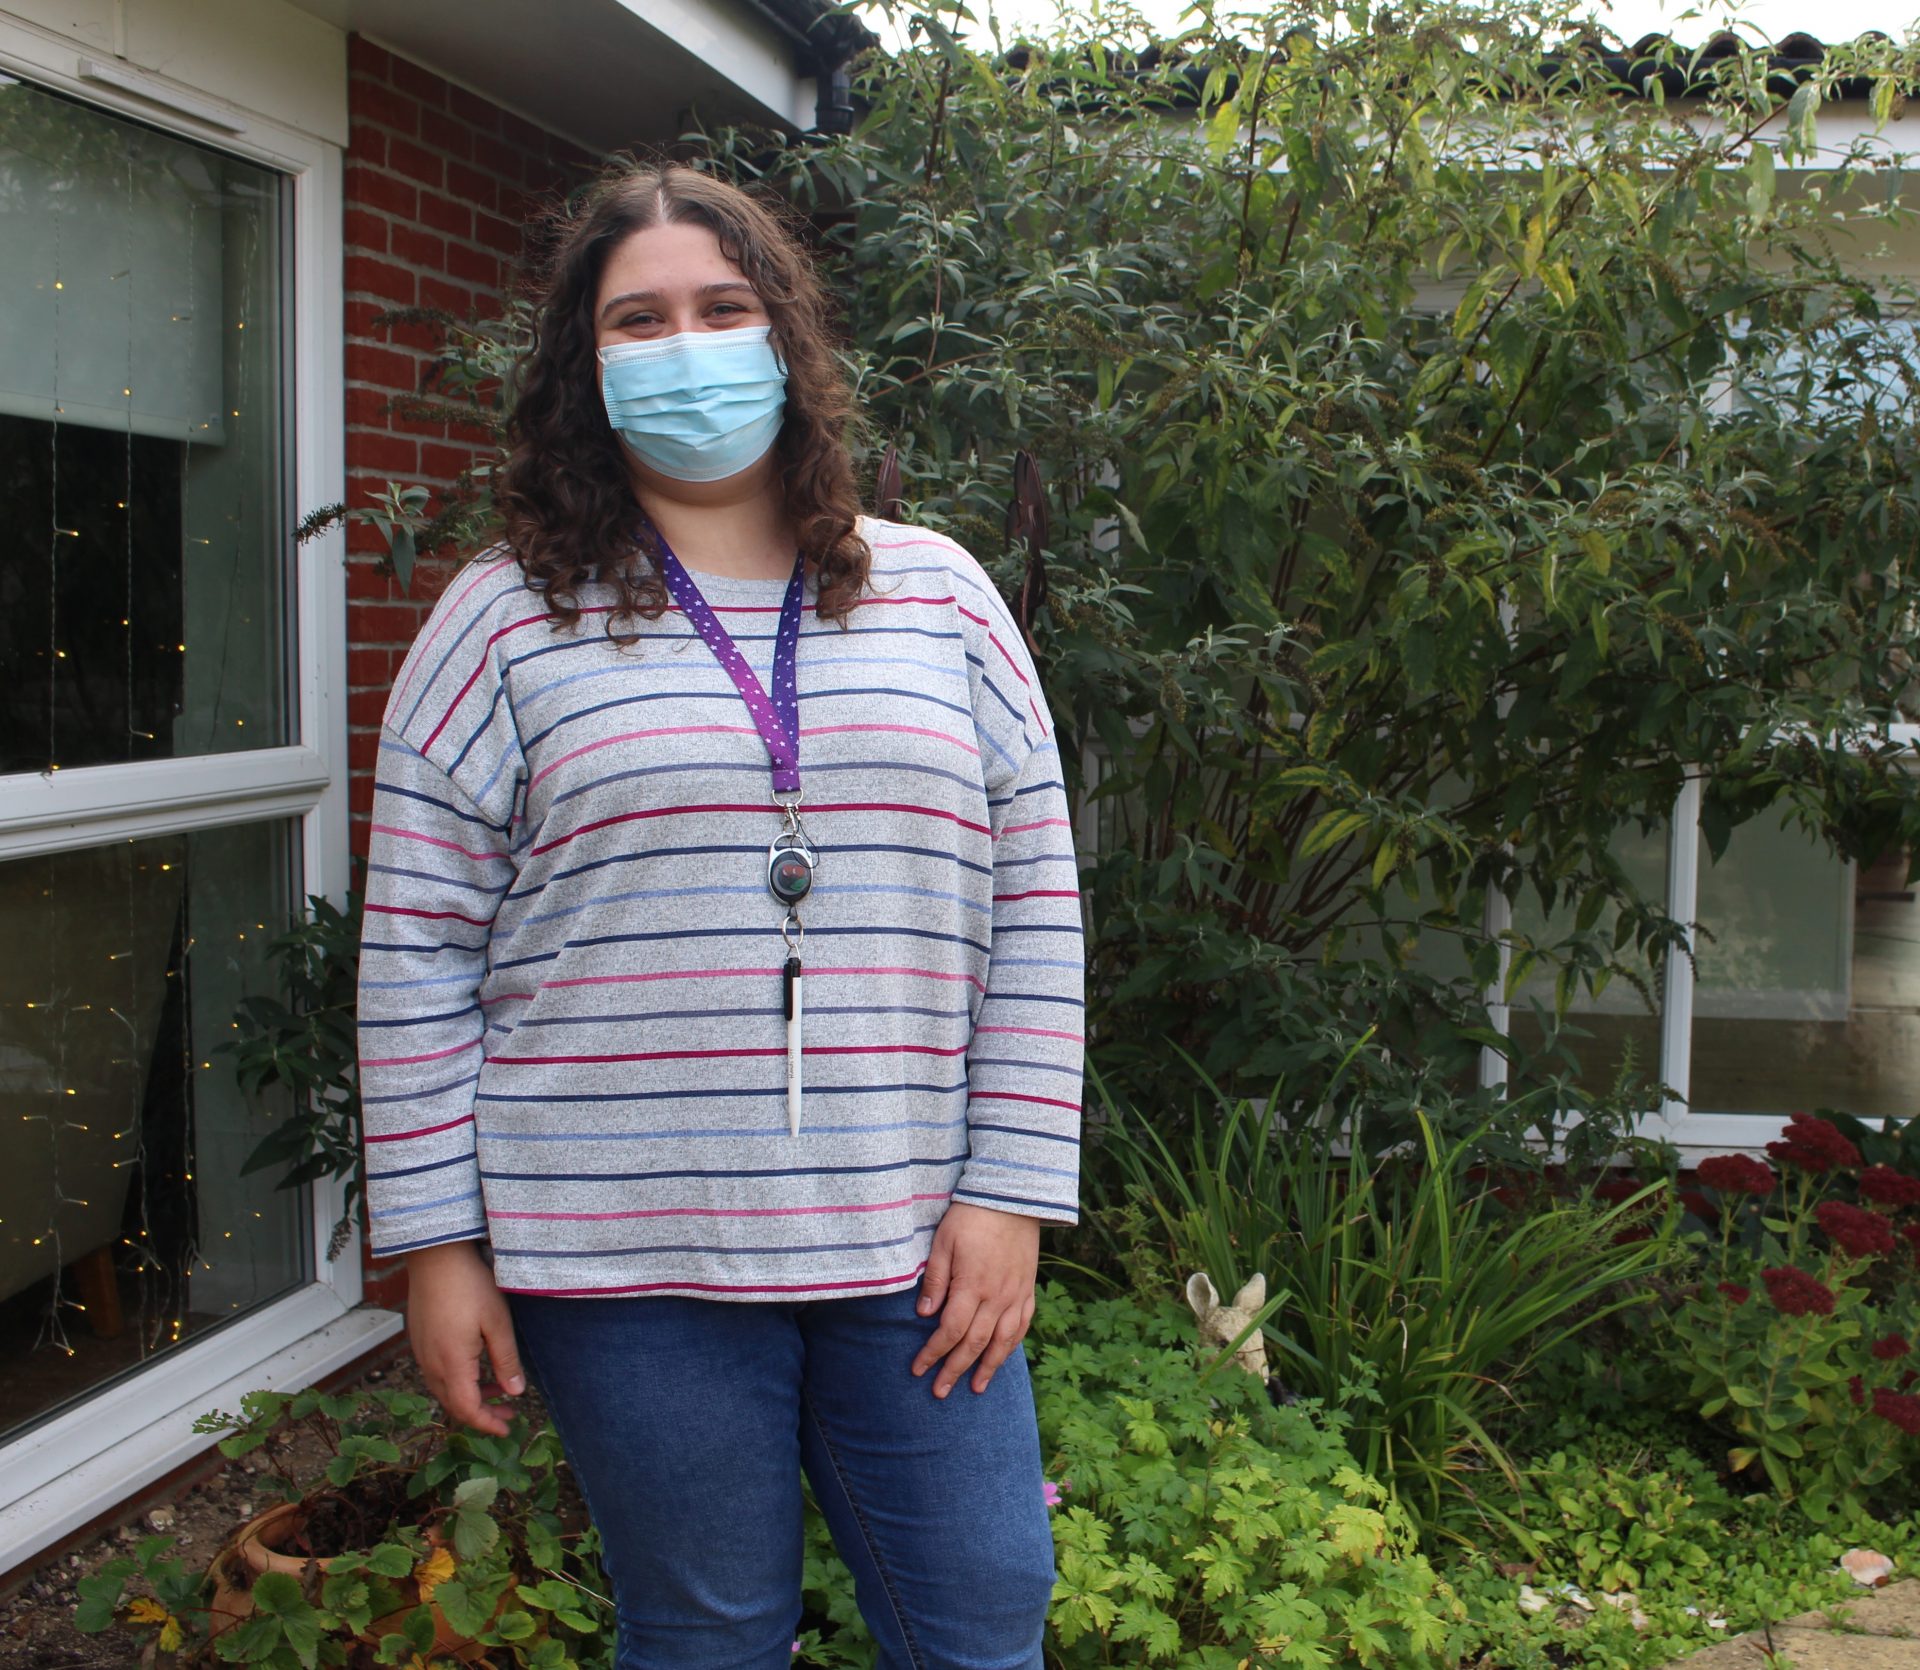 A Learning Disability Support Worker stands in garden wearing a mask and stripey top